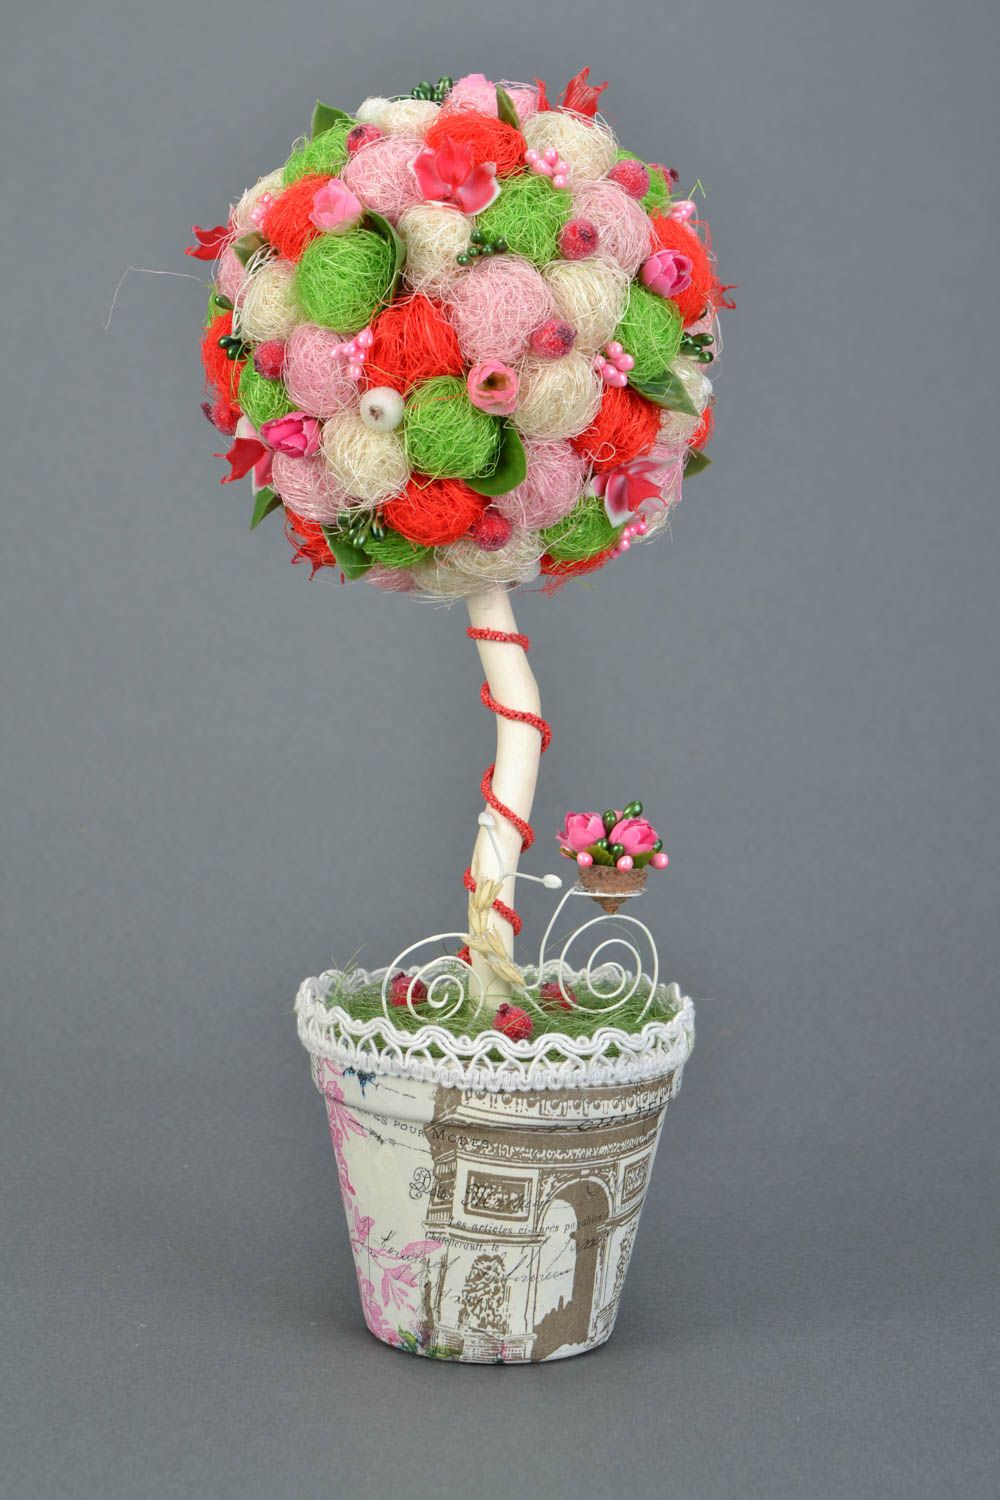 Handmade bright colorful round decorative tree topiary with flowers and berries photo 5